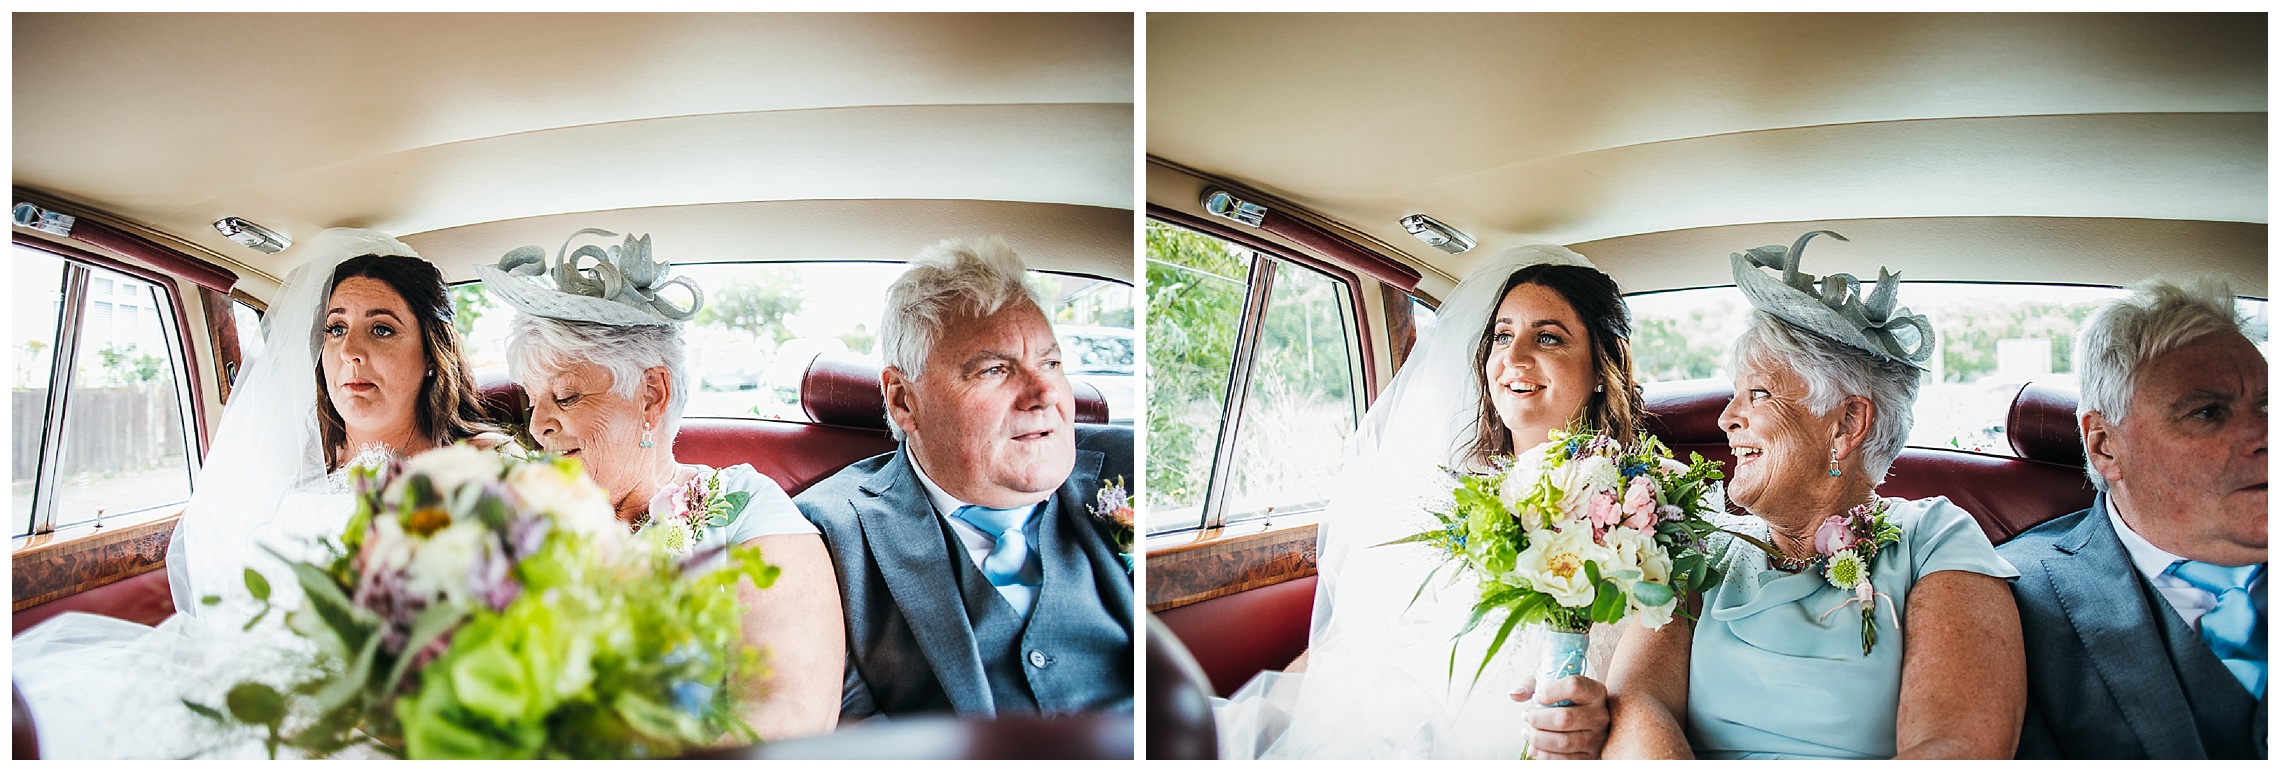 Nervous bride looks out of window as mum and dad smile